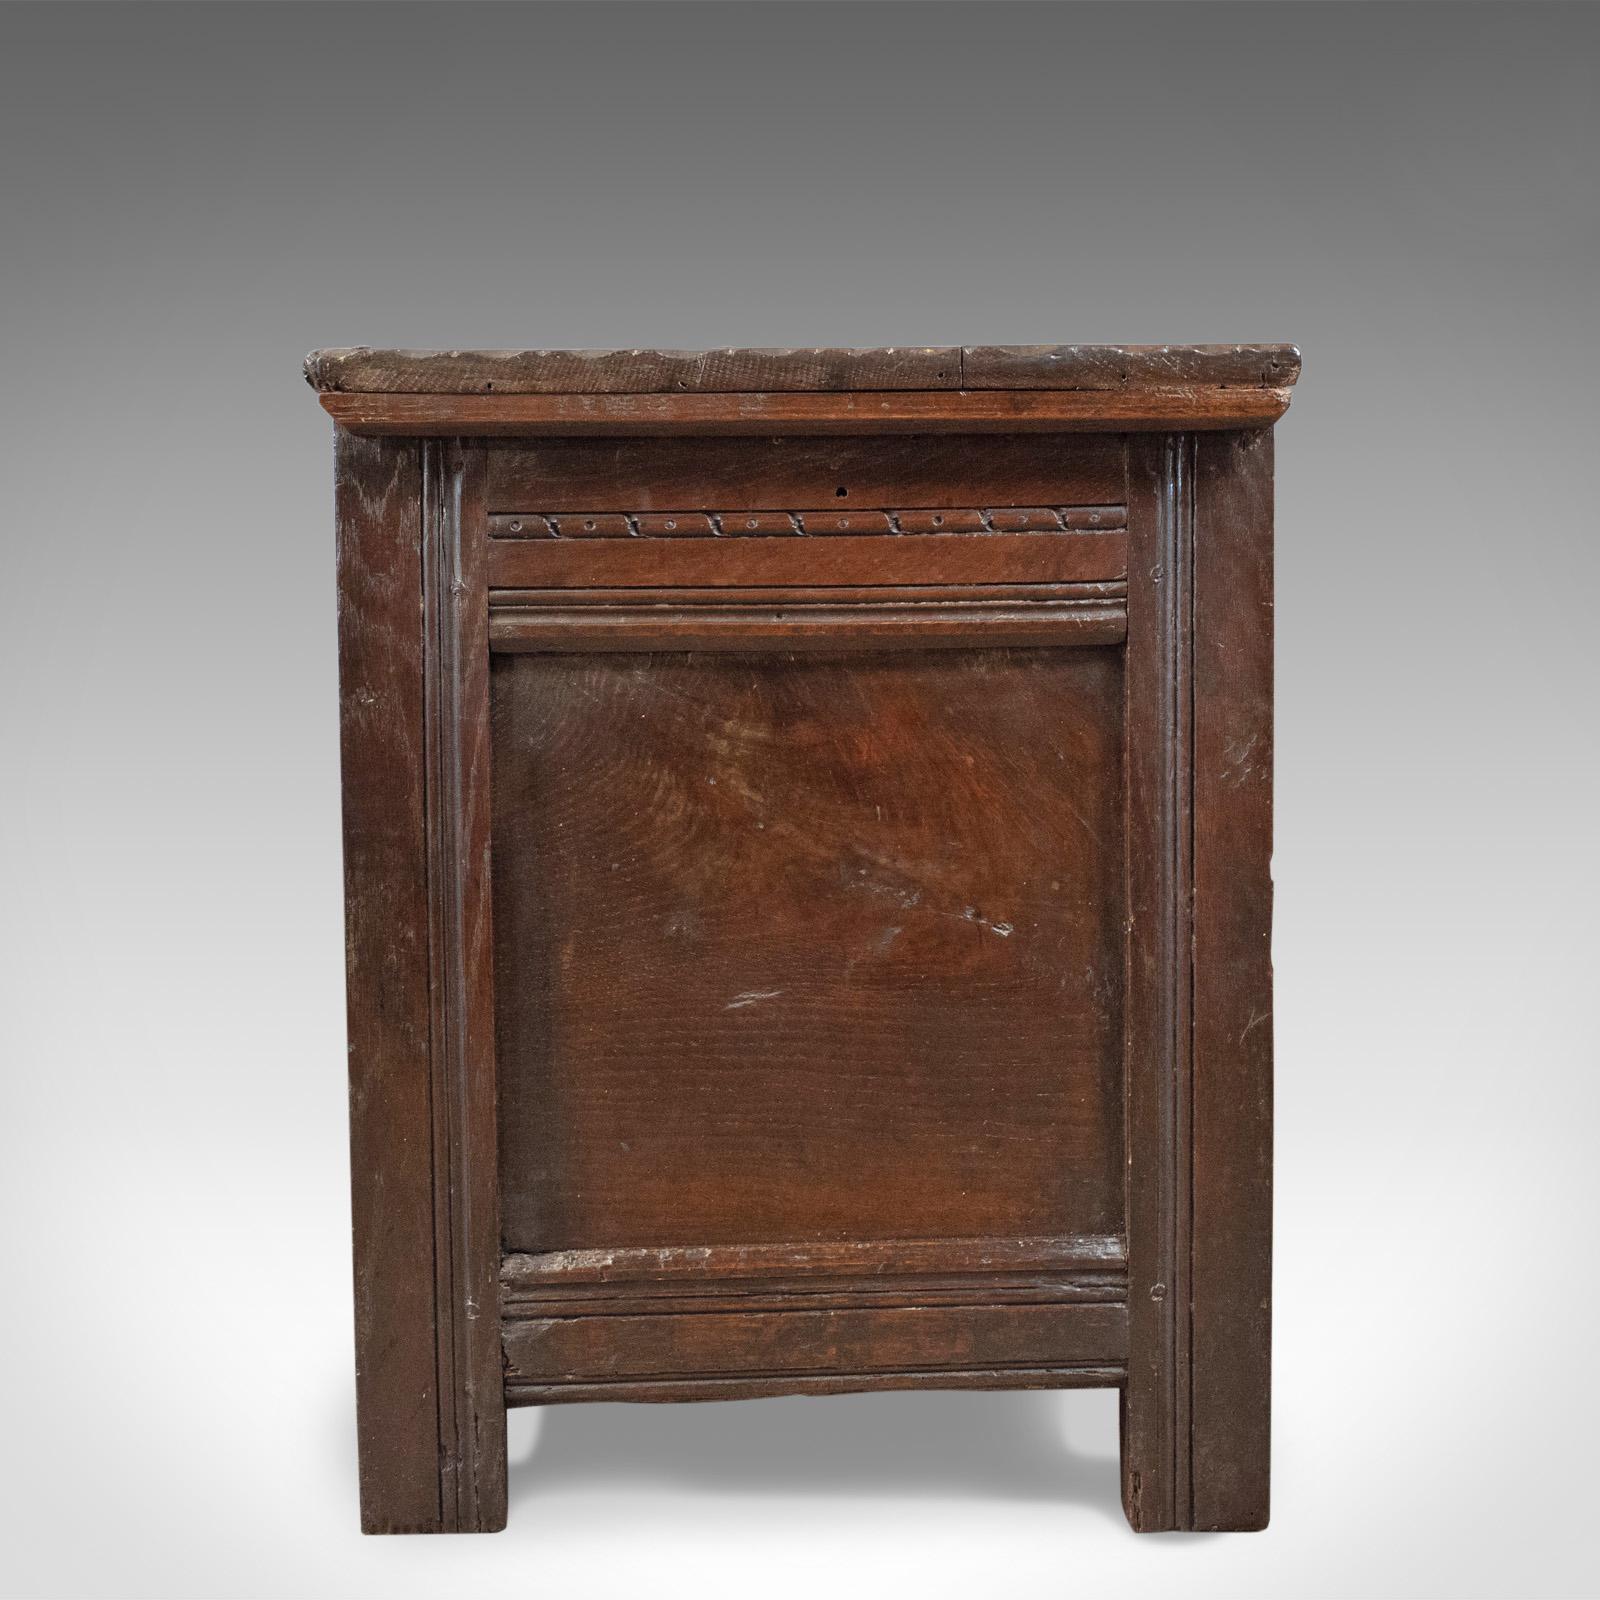 Charles II Antique Coffer, English, Oak, Joined Chest, Trunk, Late 17th Century, circa 1700